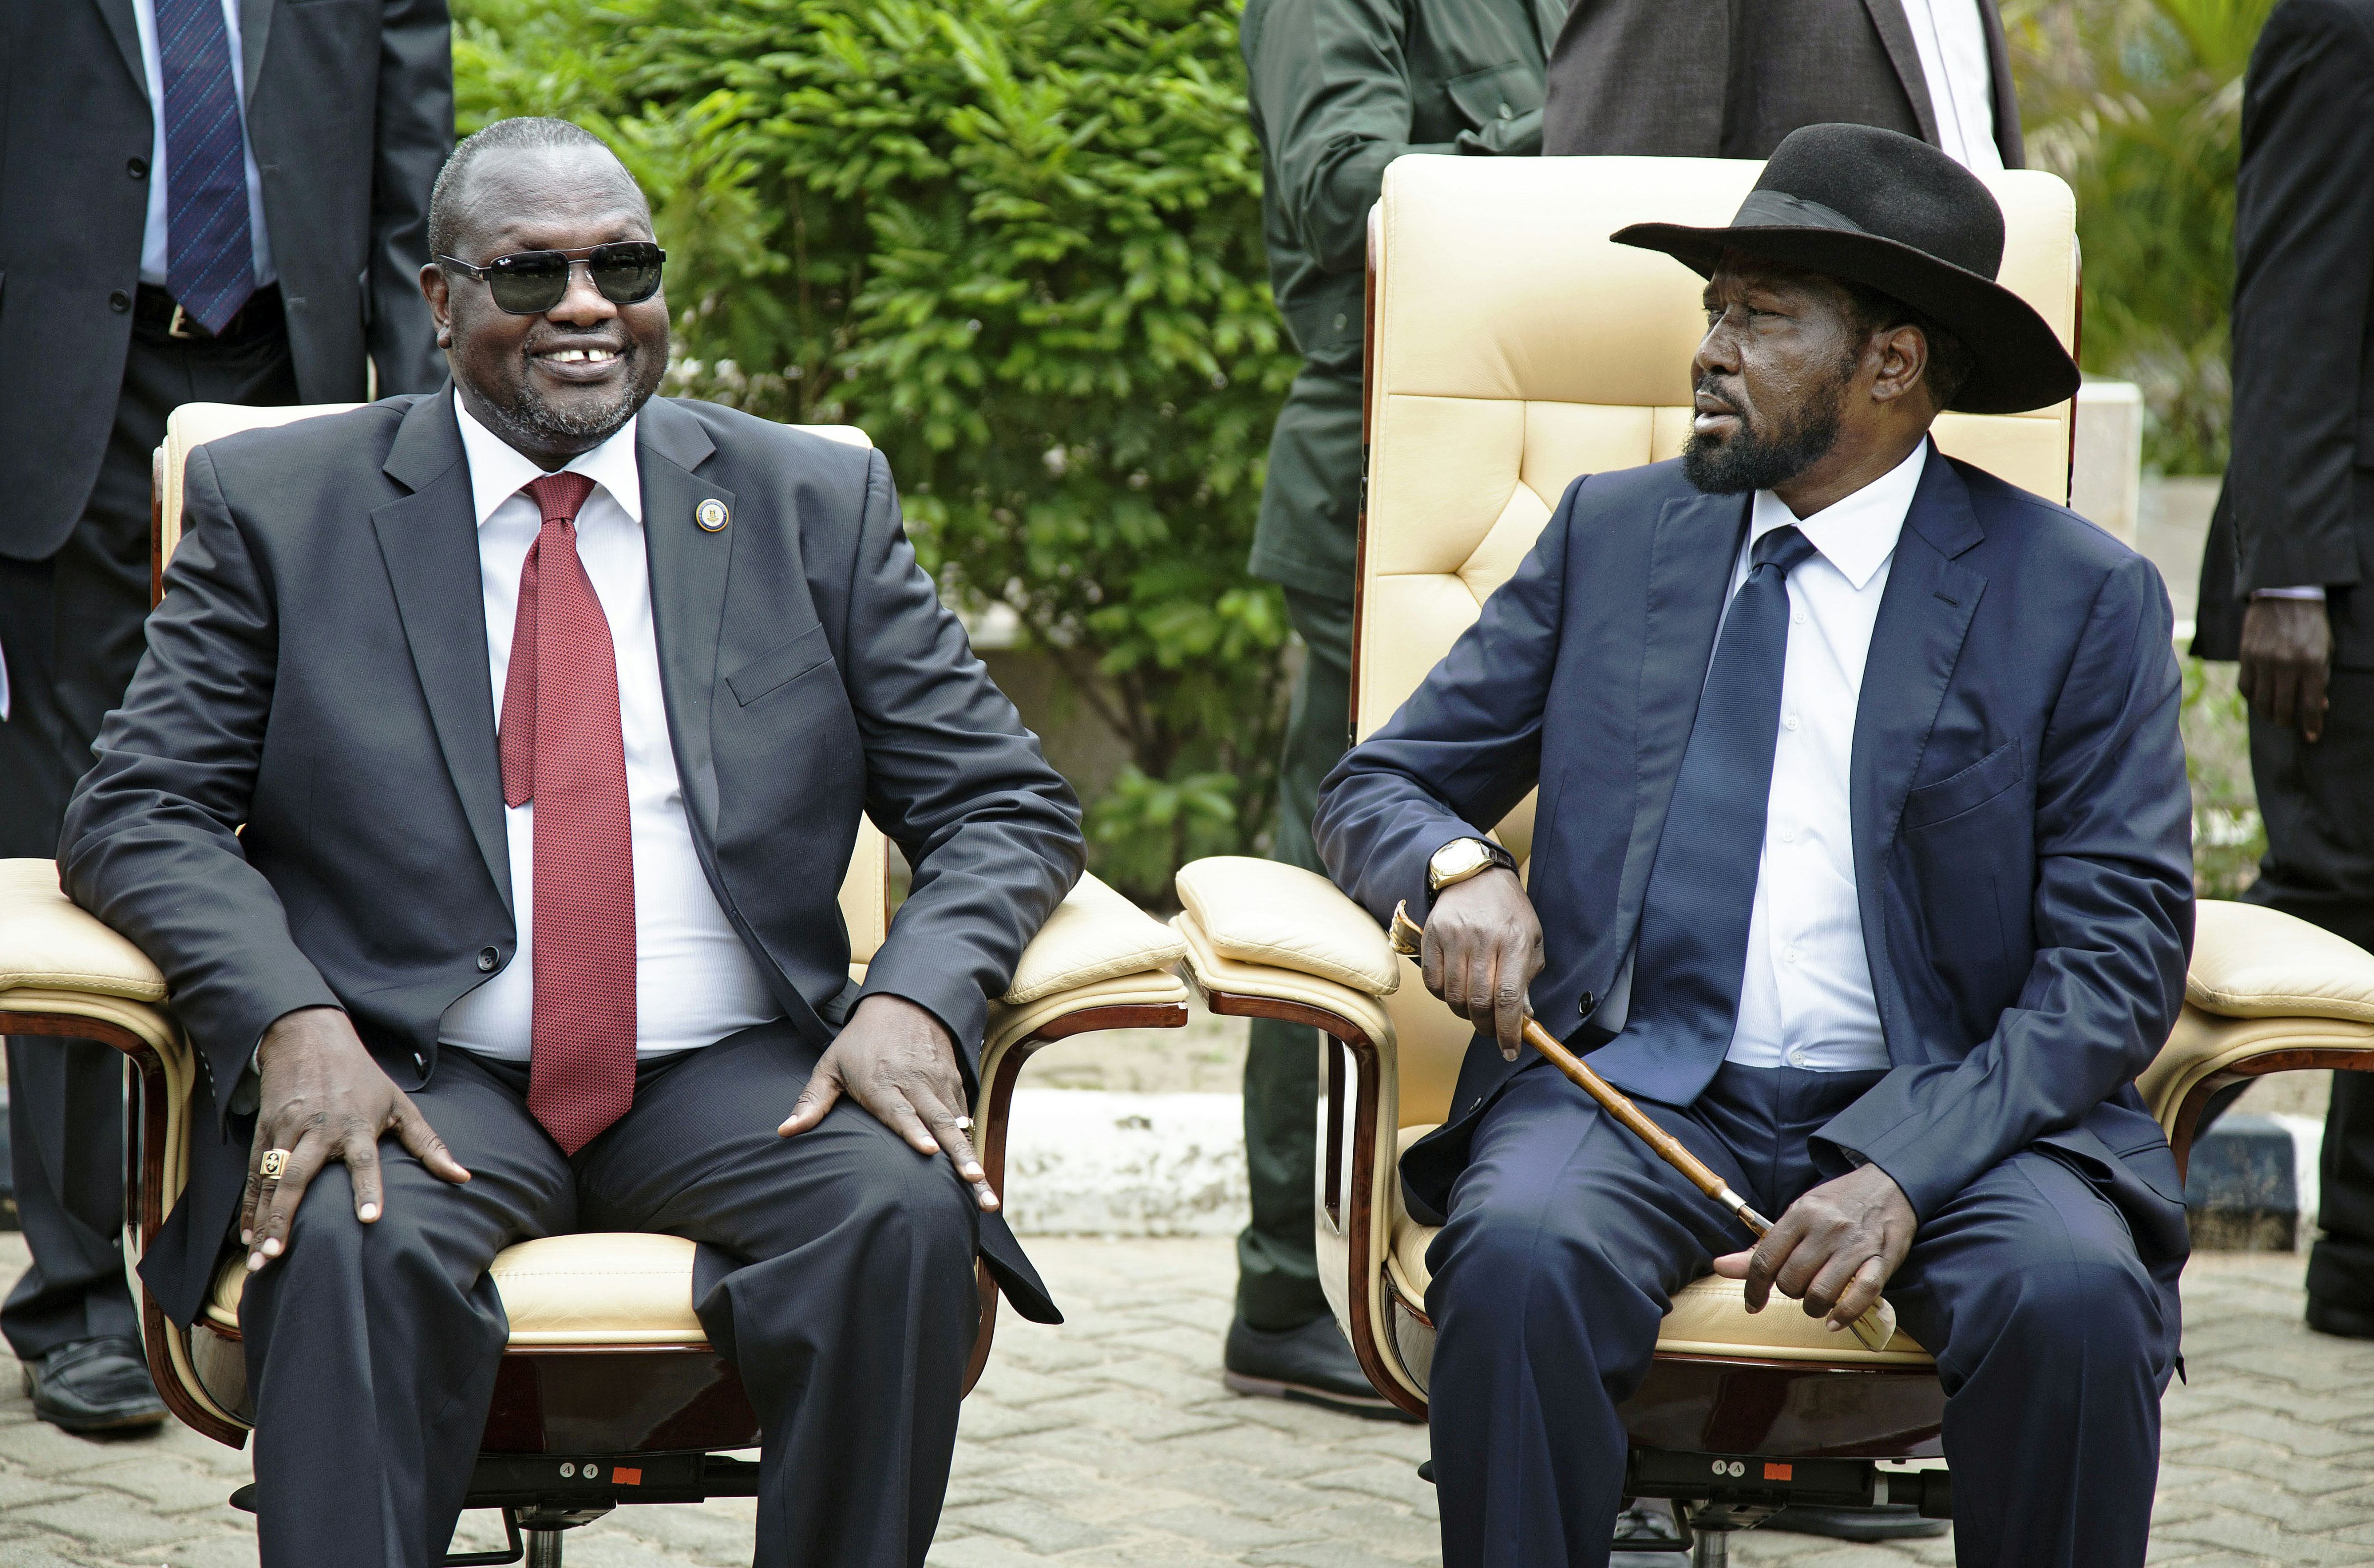 First Vice President of South Sudan and former rebel leader, Riek Machar (L), and President Salva Kiir (R), sit for an official photo with the 30 members of the new cabinet of the Transitional Government at the Cabinet Affairs Ministry, in Juba on April 29, 2016. (ALBERT GONZALEZ FARRAN—AFP/Getty Images)